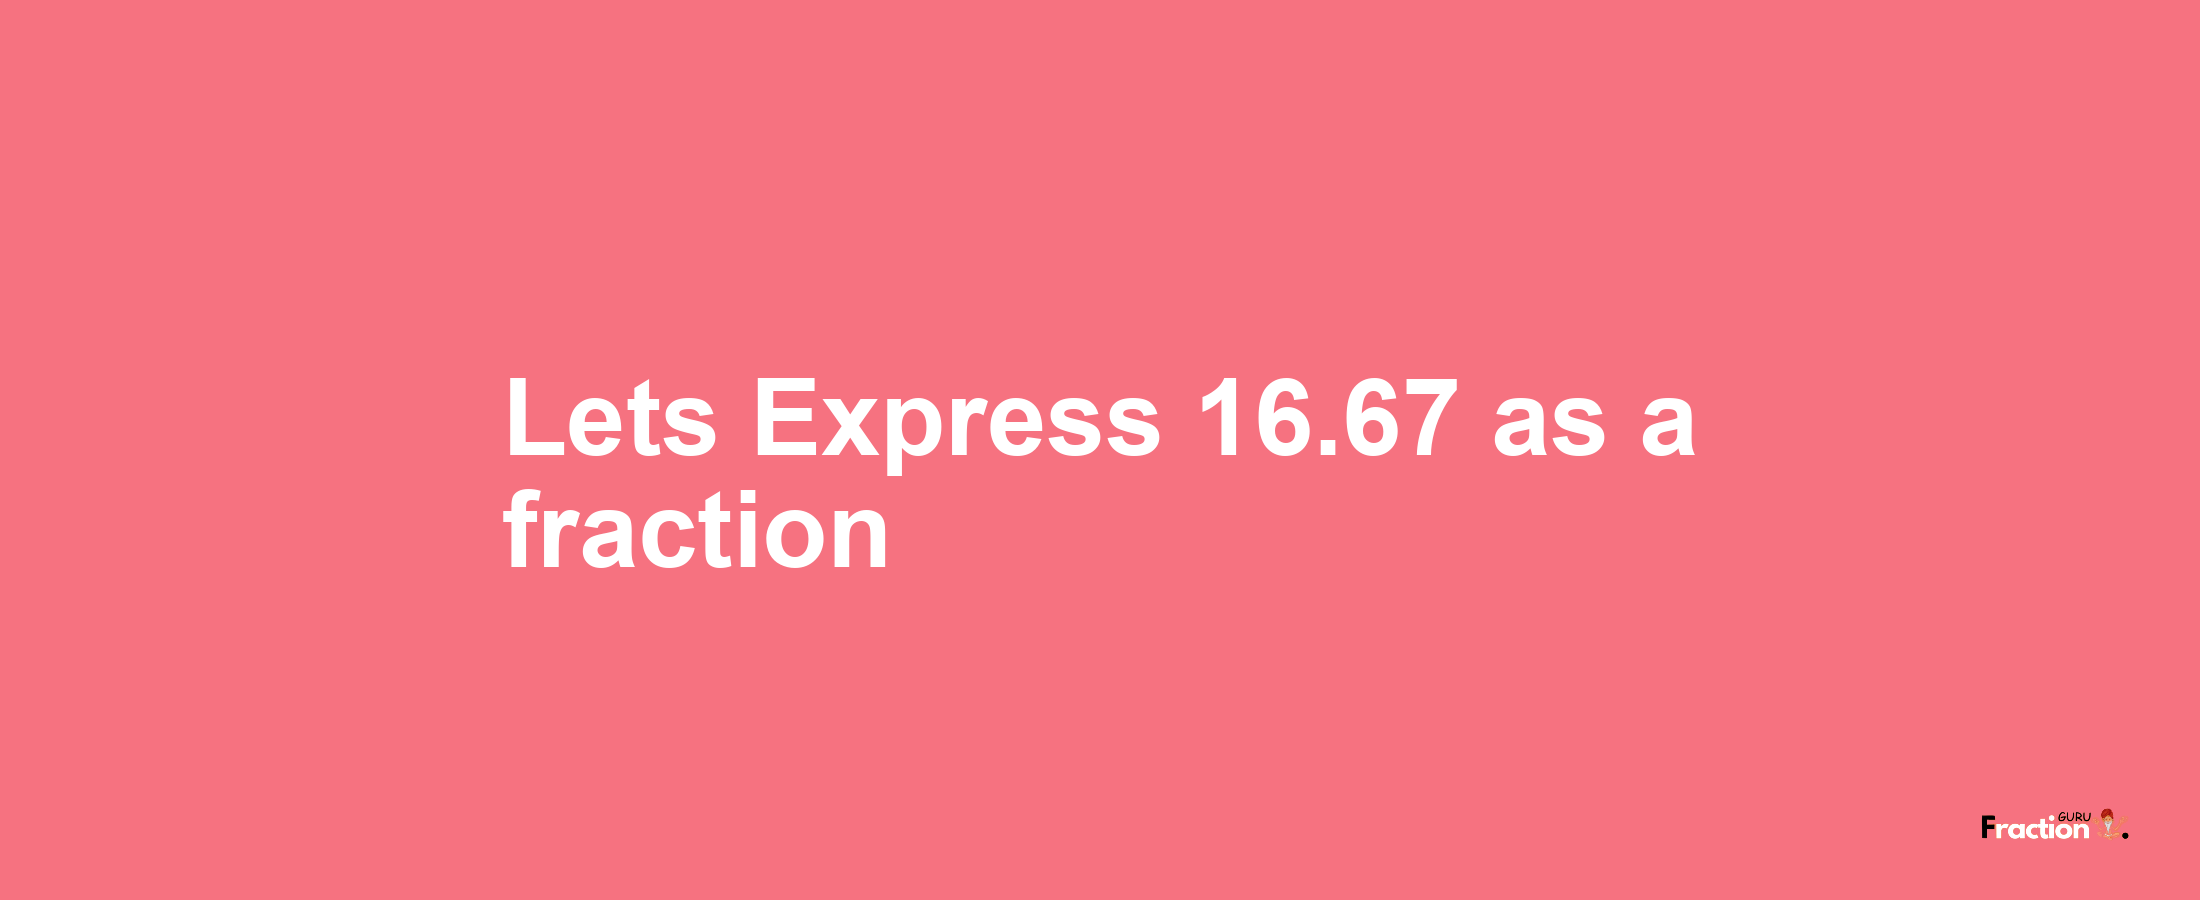 Lets Express 16.67 as afraction